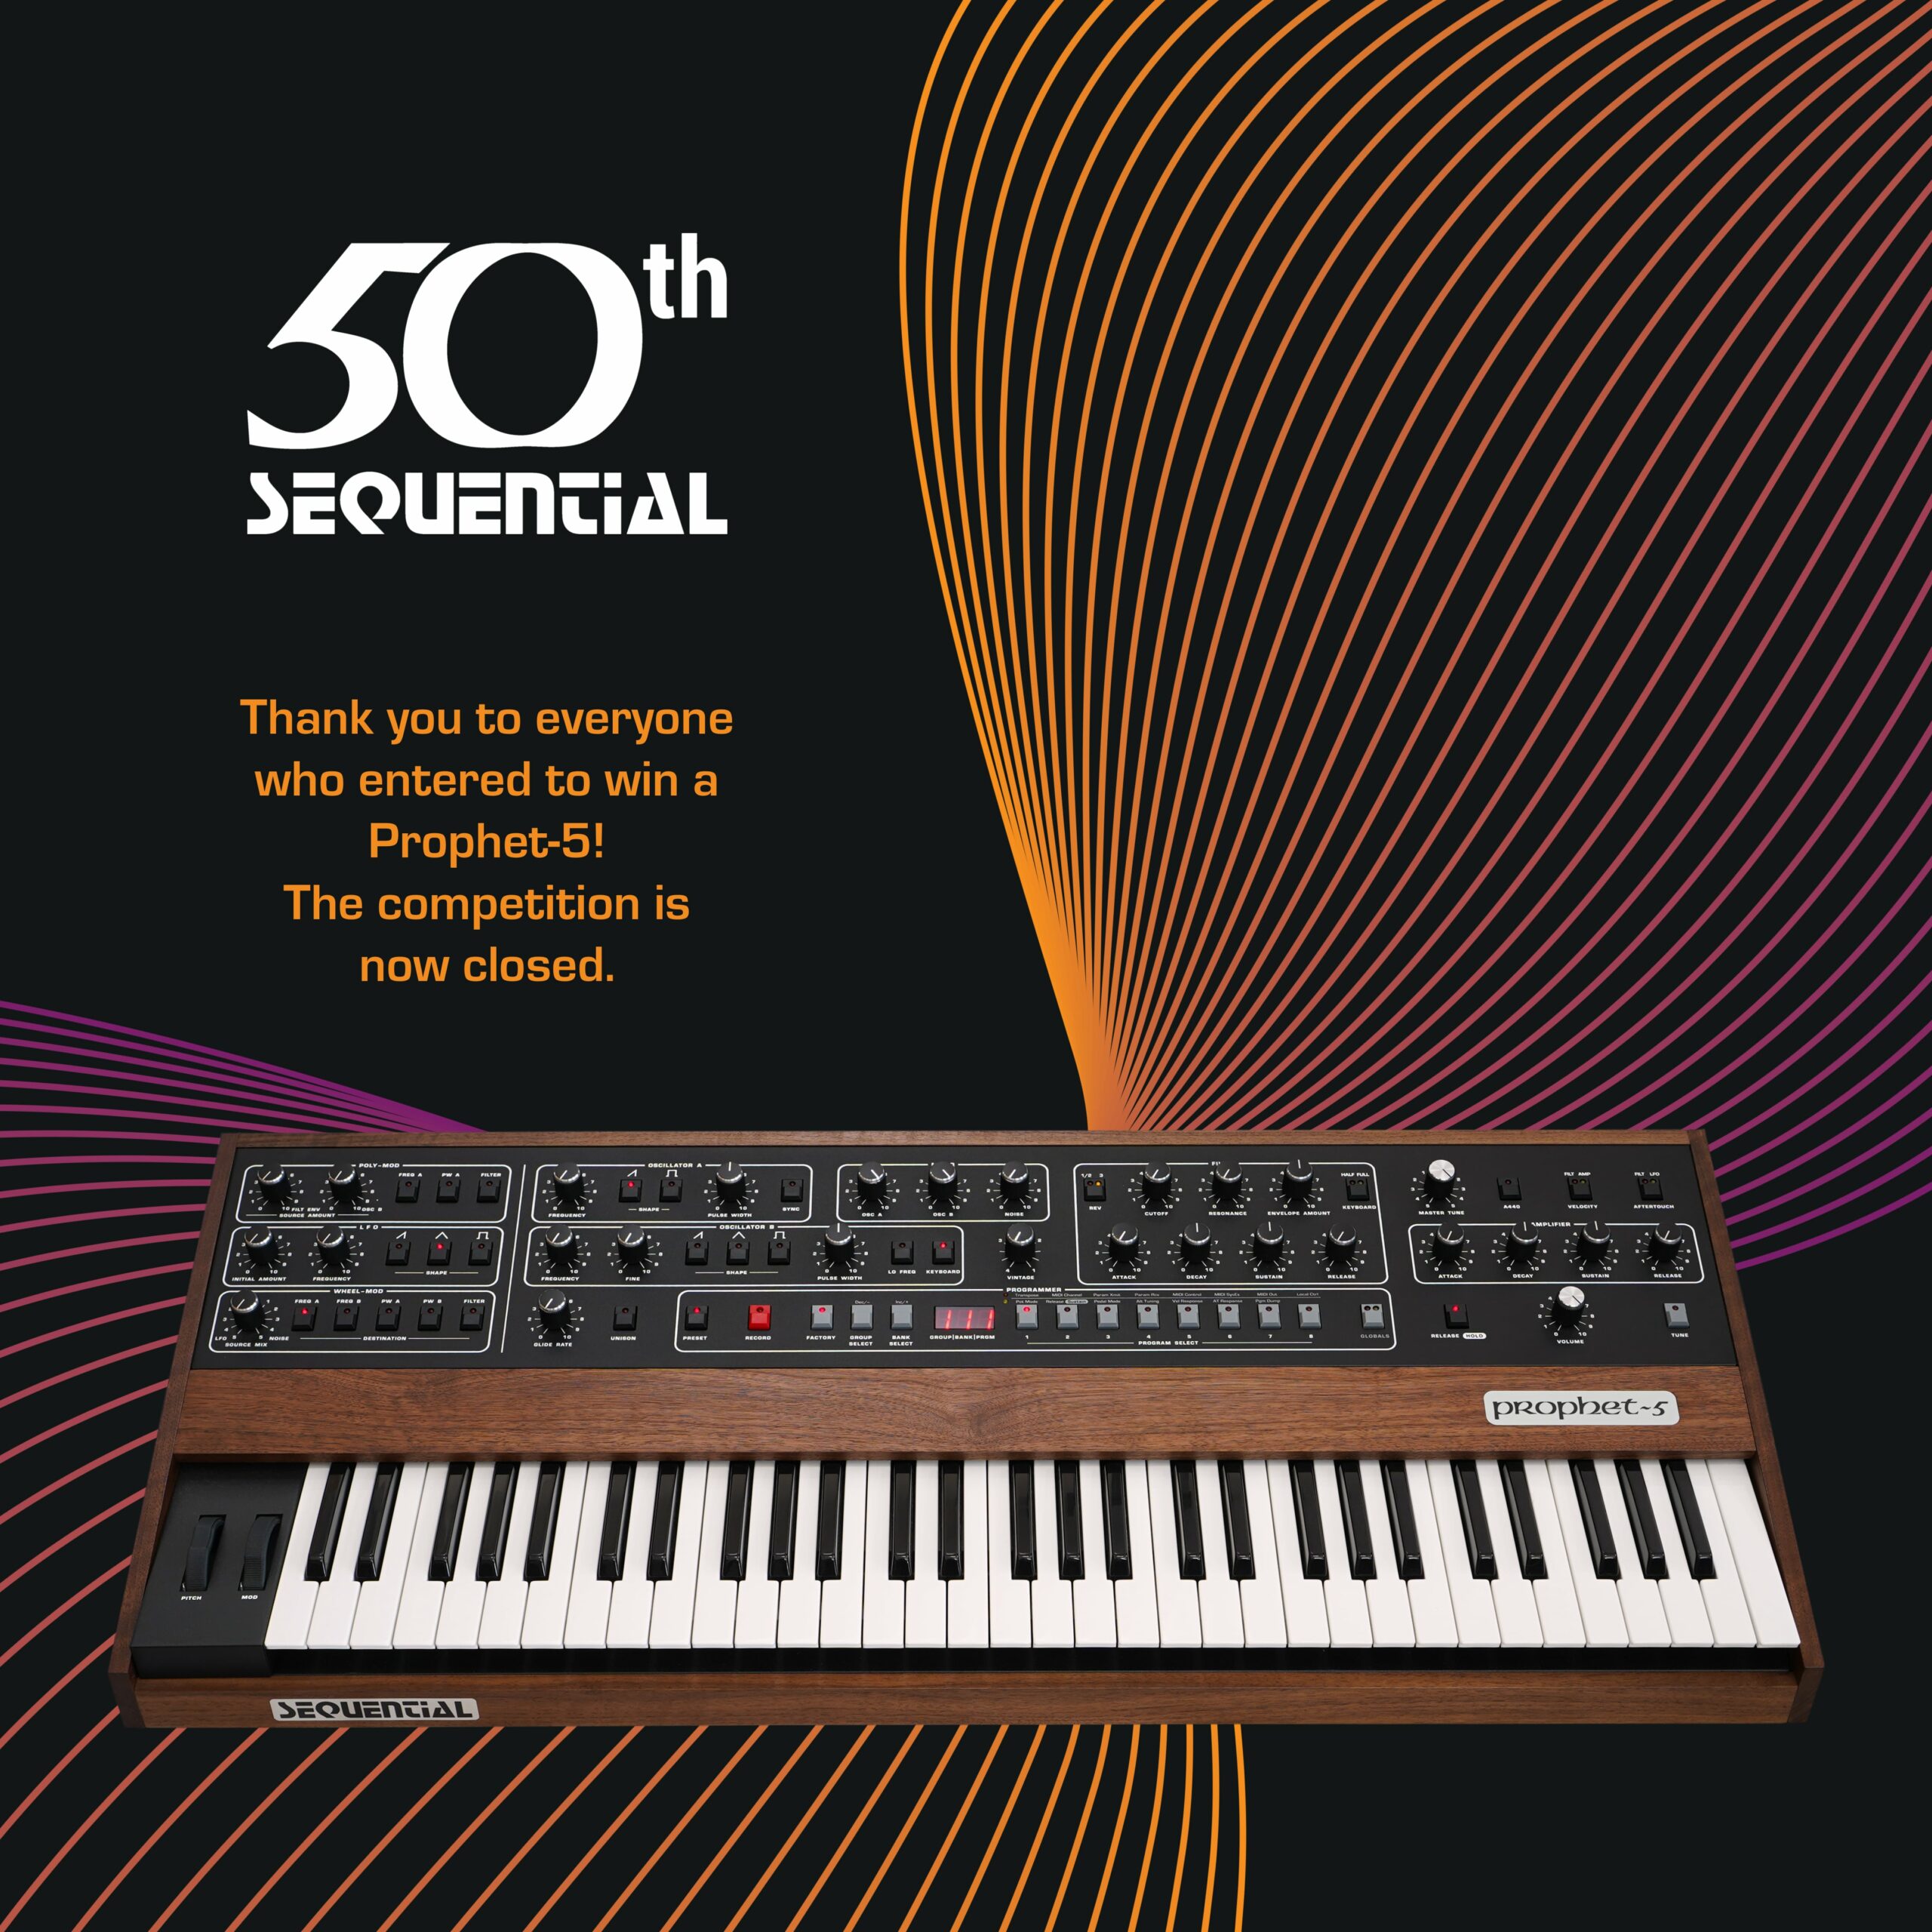 A Prophet-5 keyboard synthesizer with artistic sound waves radiating from it. "50 years of Sequential" logo above it.